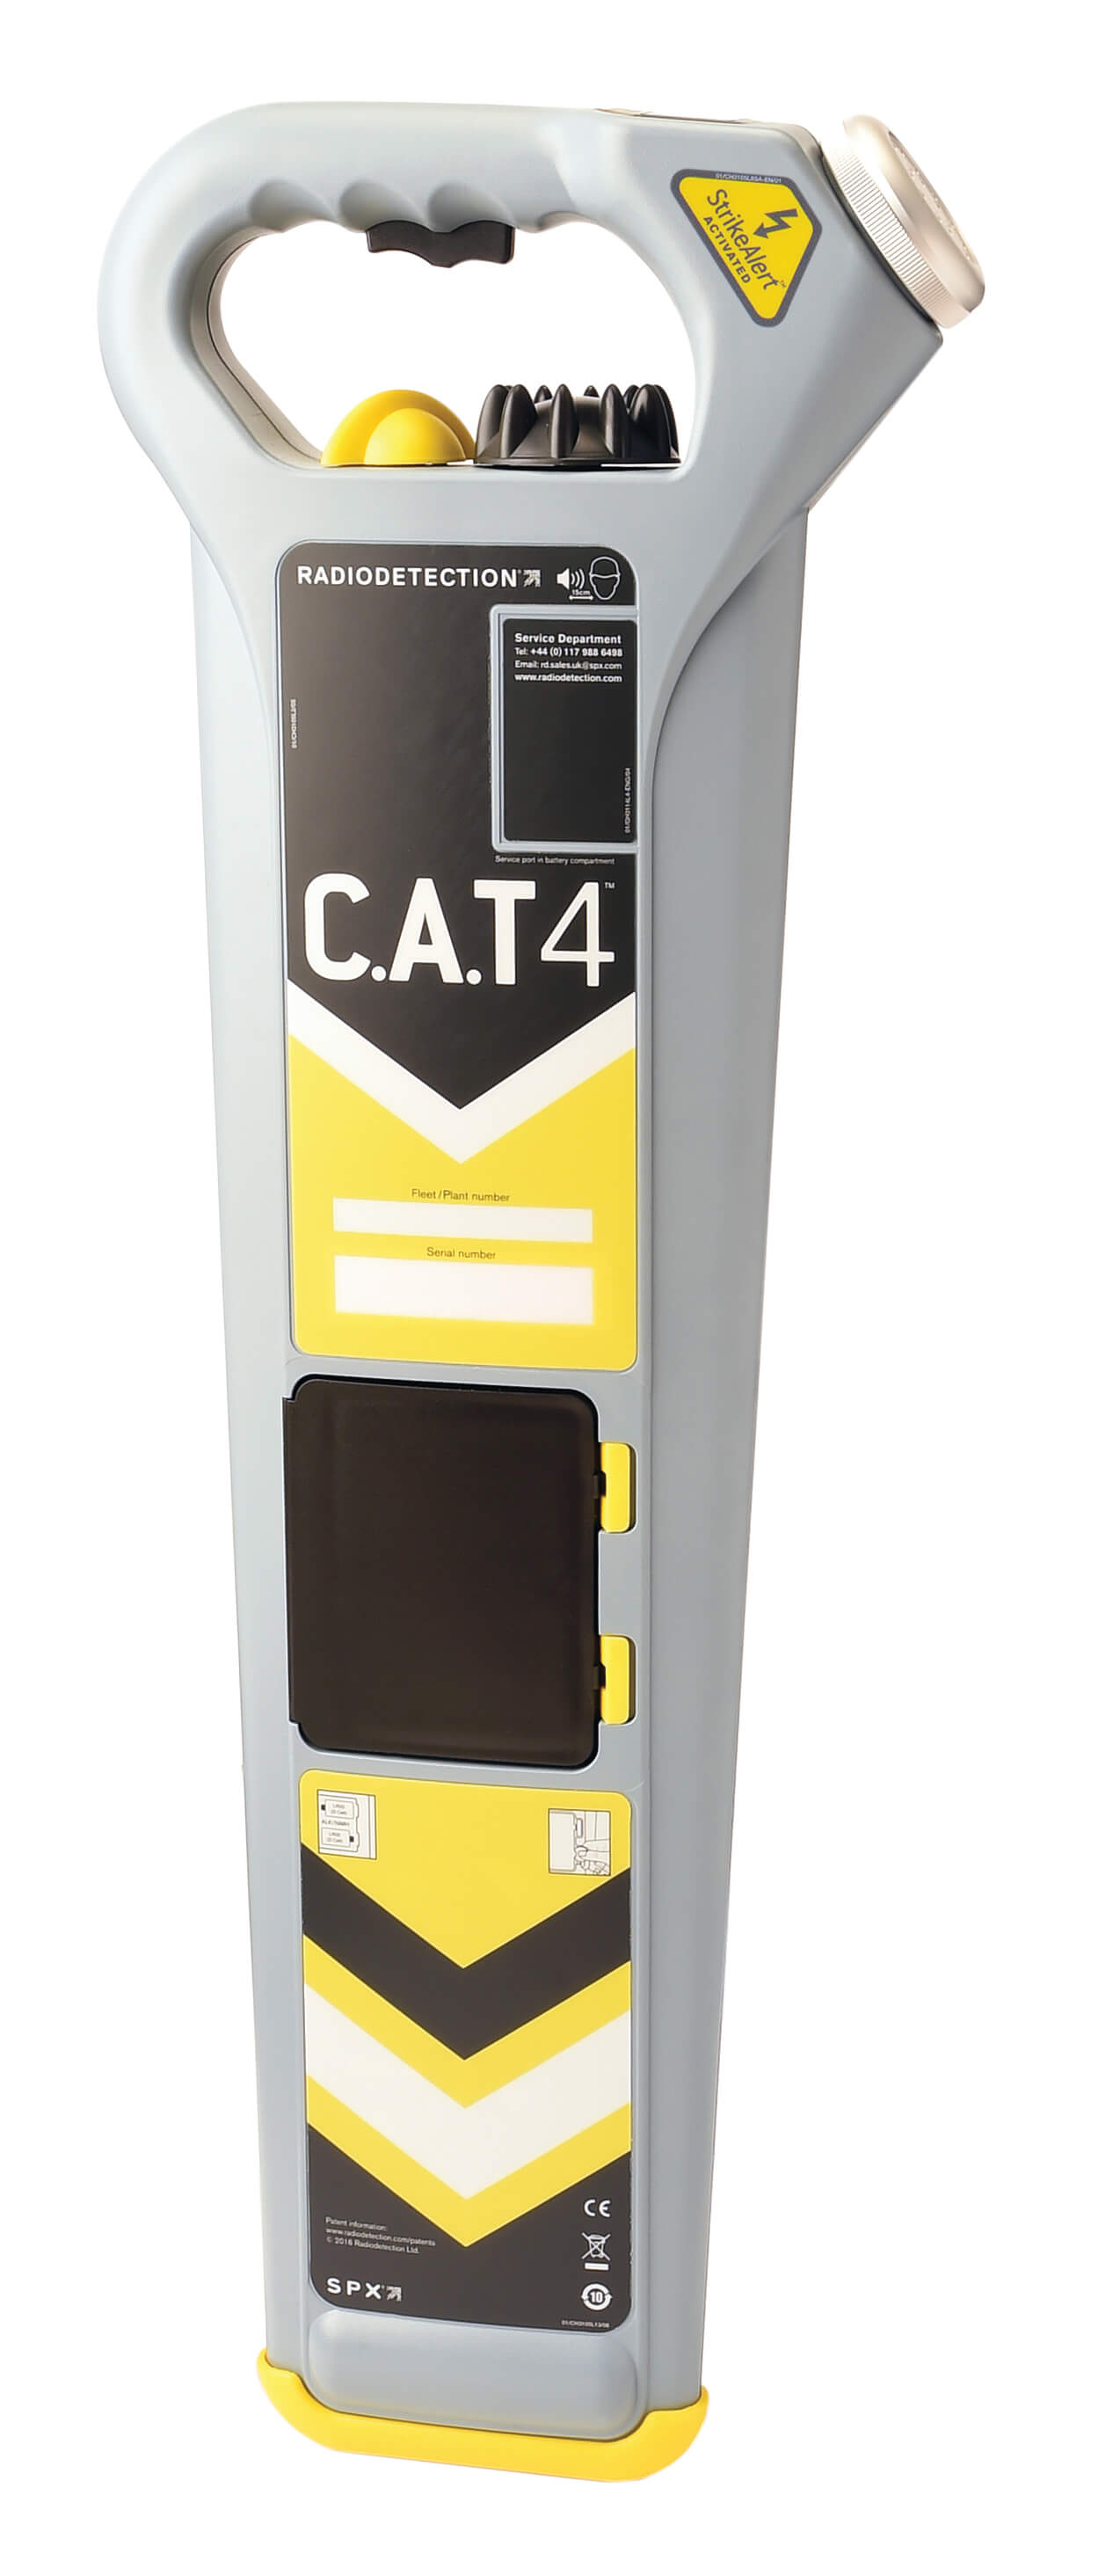 Radiodetection CAT4 with StrikeAlert Cable Detector